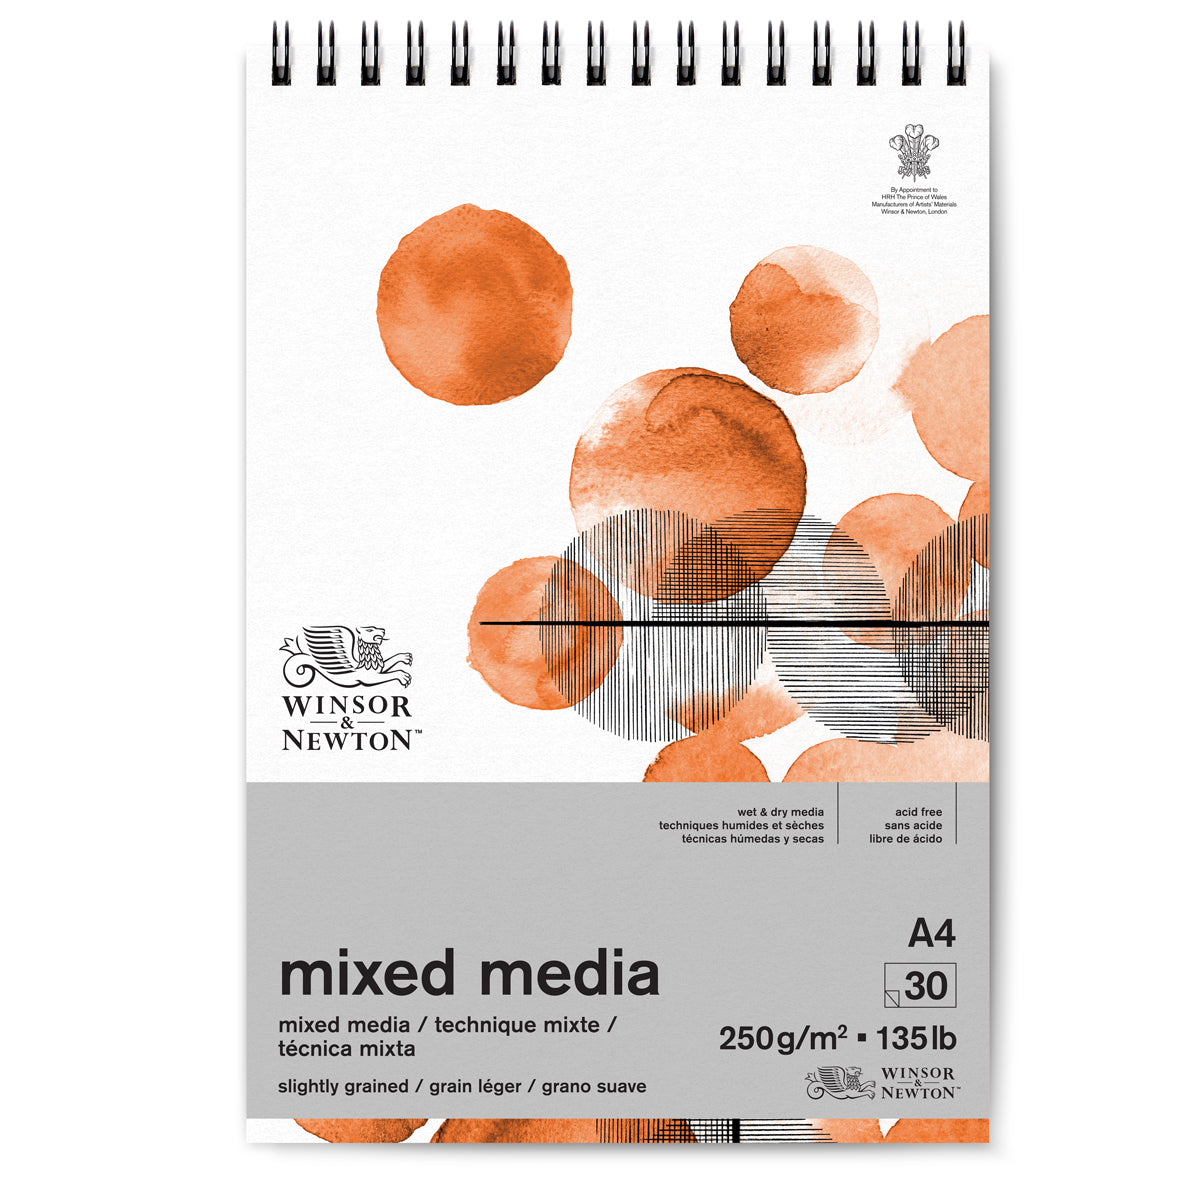 Winsor and Newton - Mixed Media Sketch Pad - Spiral 30 Sheet - 250gsm A4